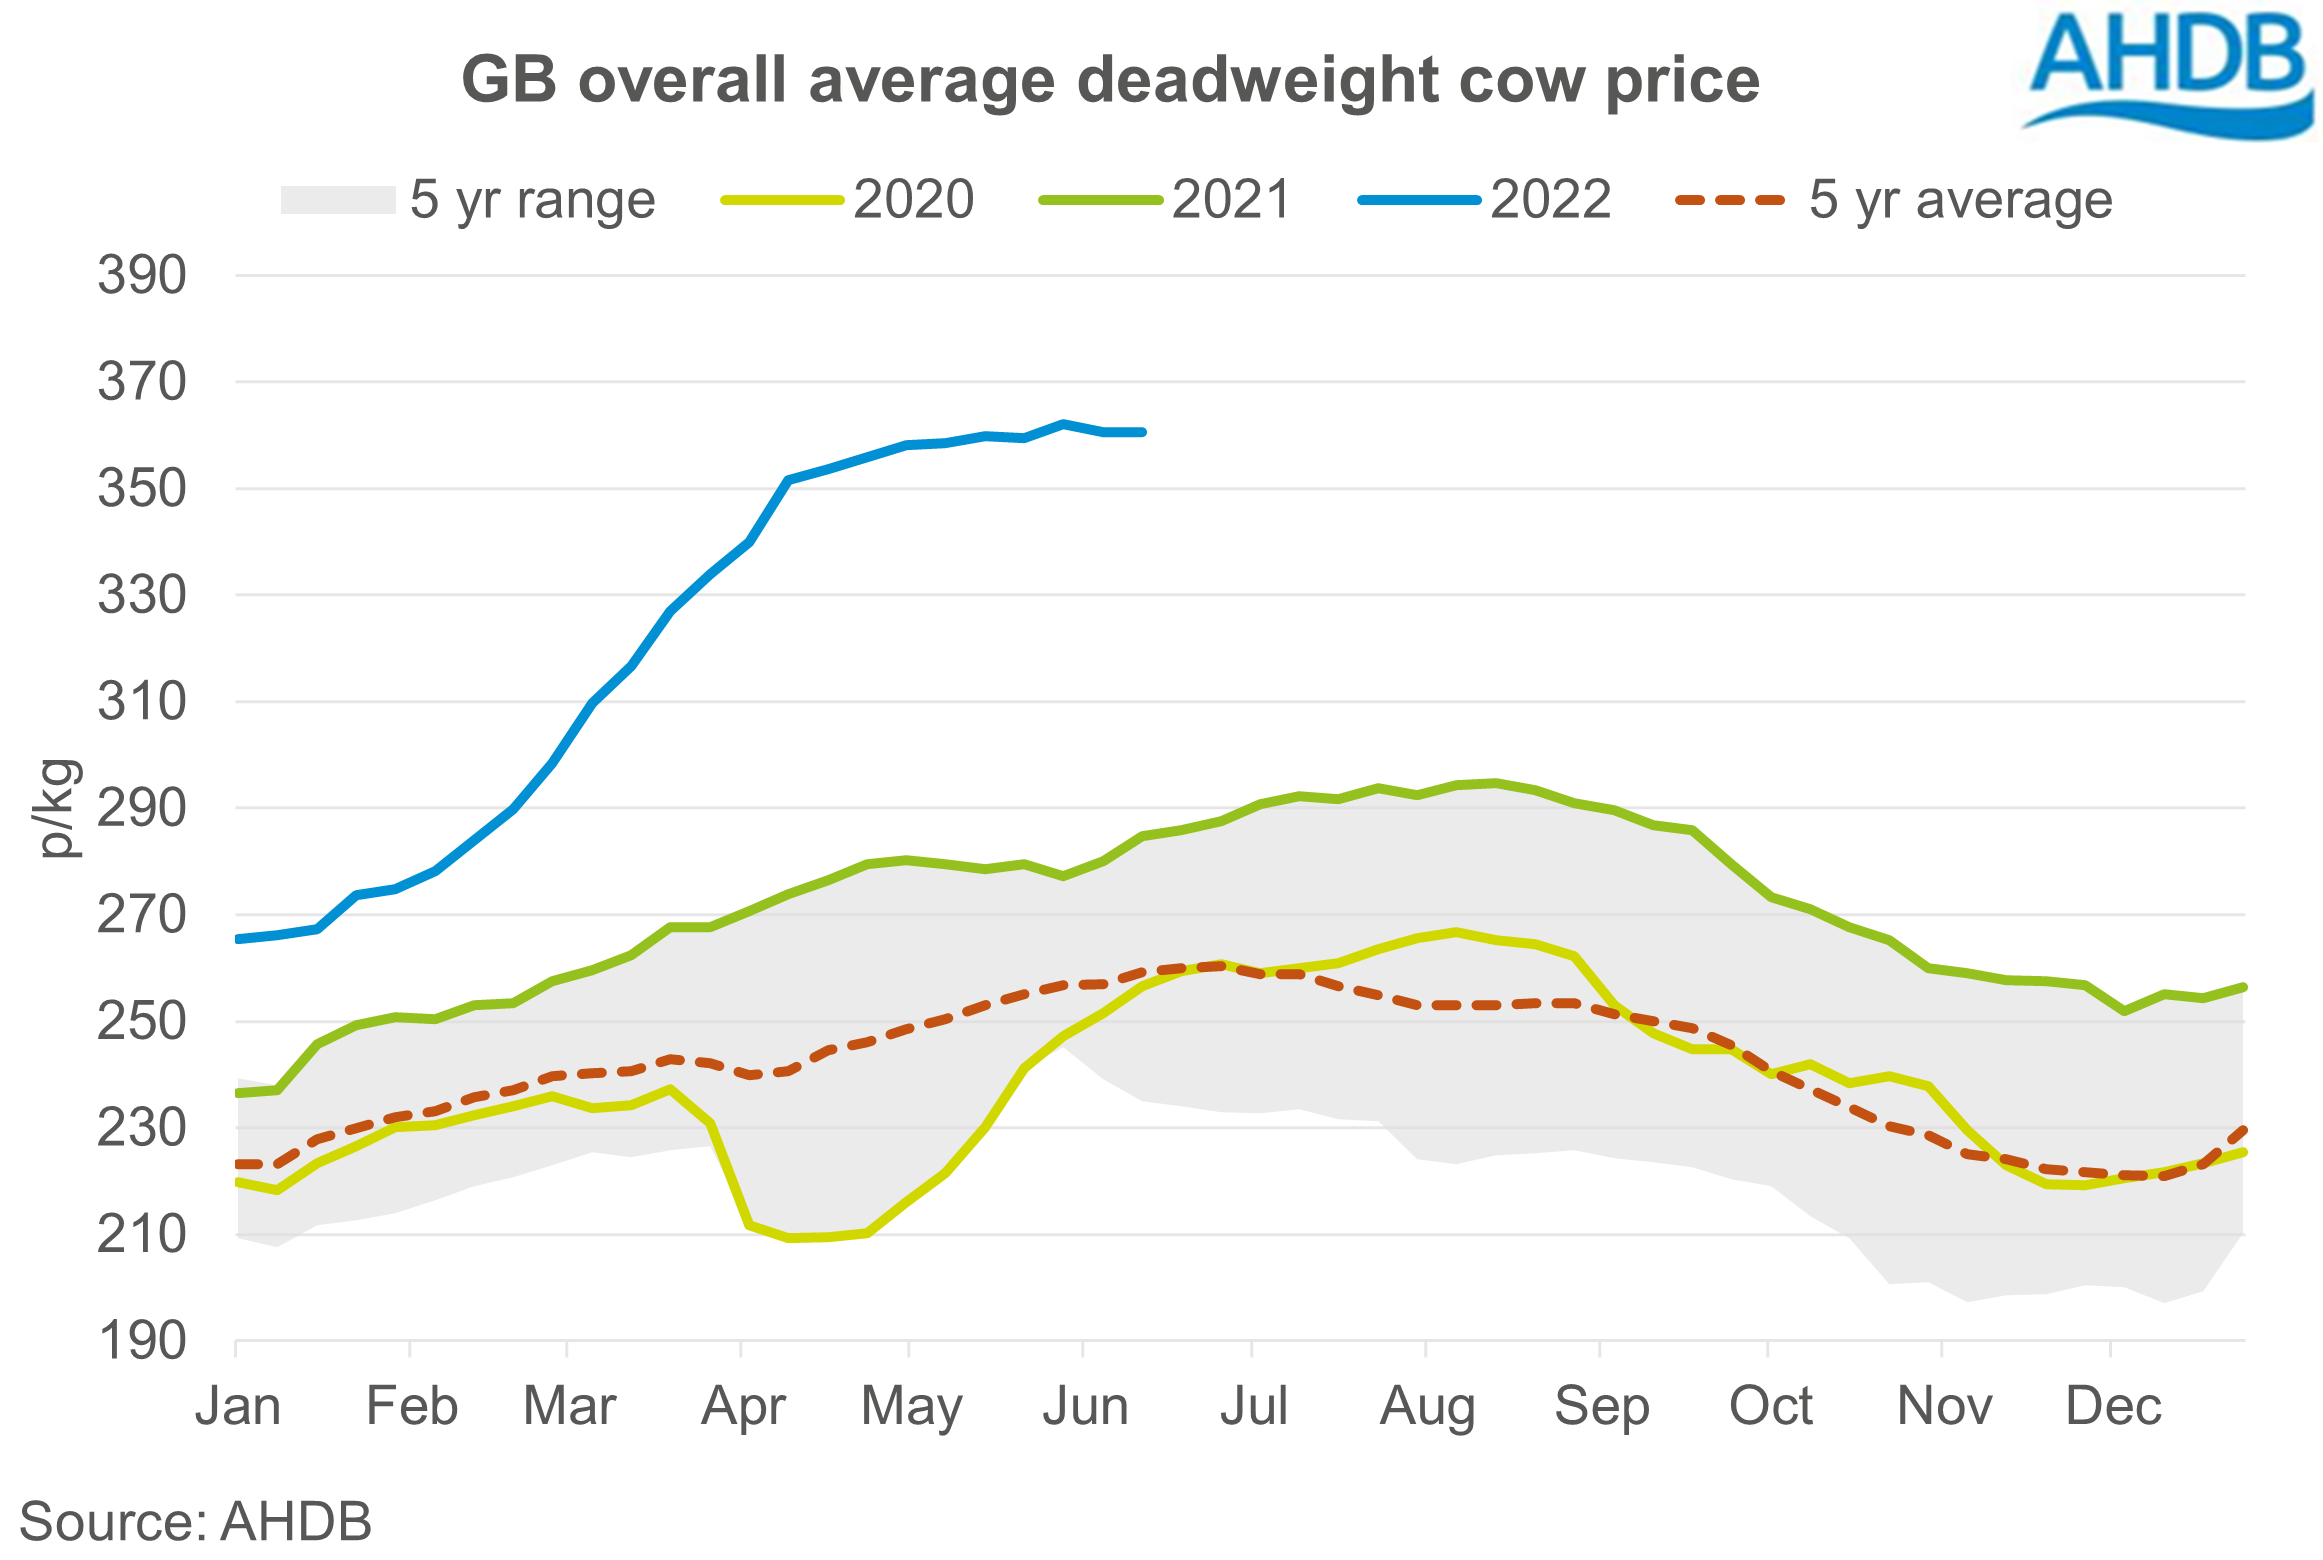 Graph showing weekly average GB deadweight cow prices